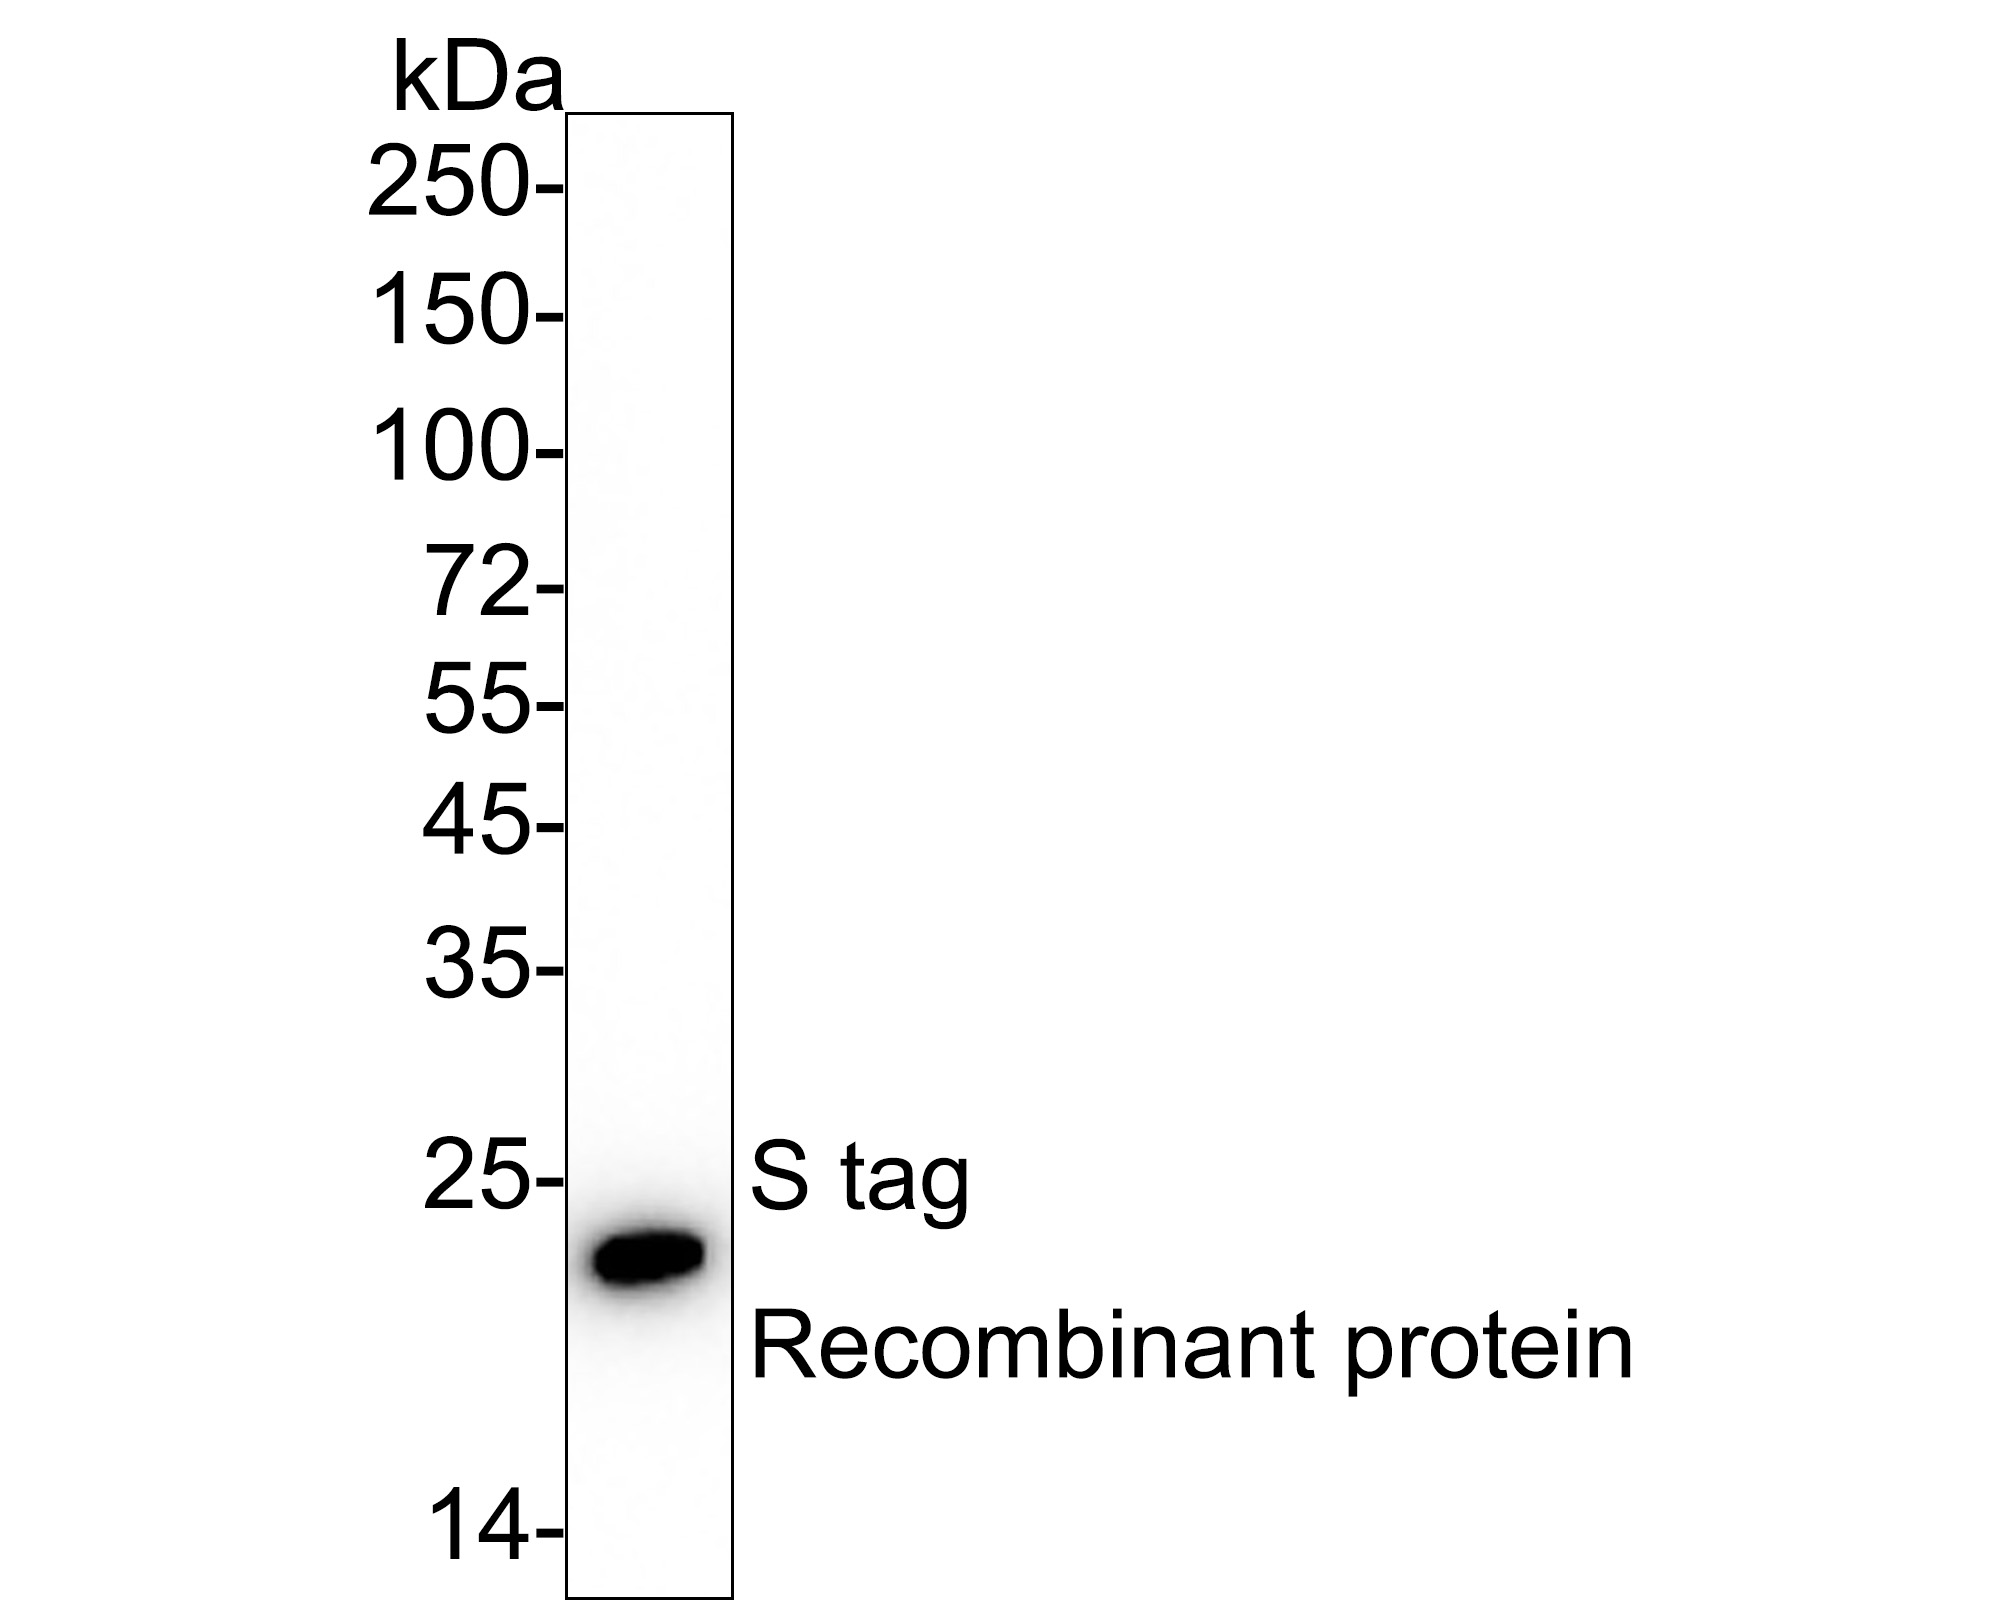 Western blot analysis of S tag on S-tagged recombinant protein using anti-S tag antibody at 1/5,000 dilution.